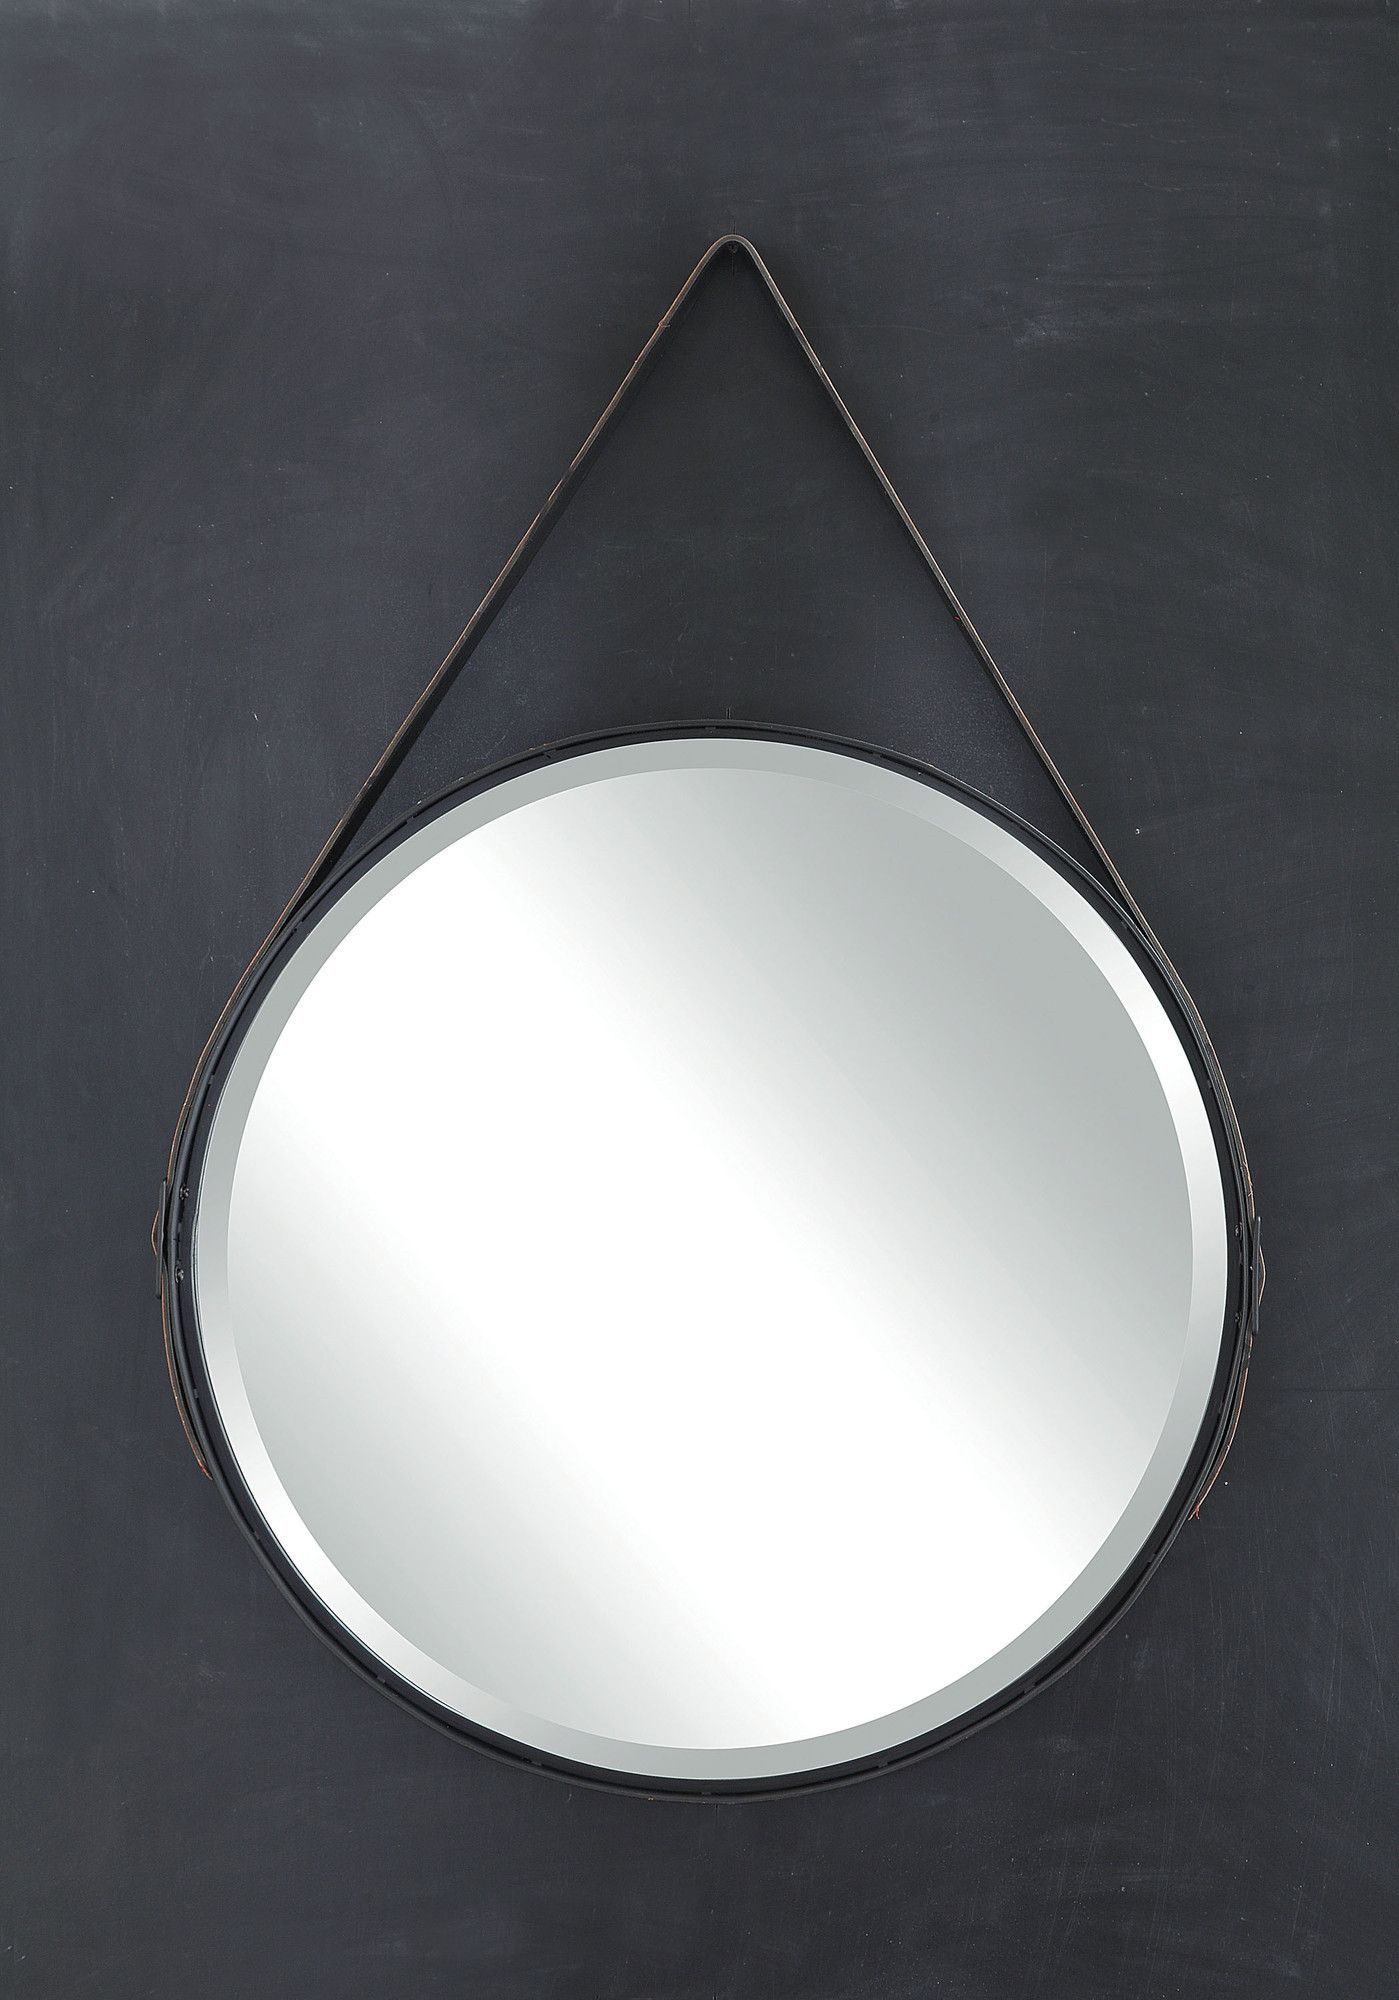 Round Mirror With Leather Strap | Mirrors With Leather Straps, Metal With Regard To Black Leather Strap Wall Mirrors (View 14 of 15)